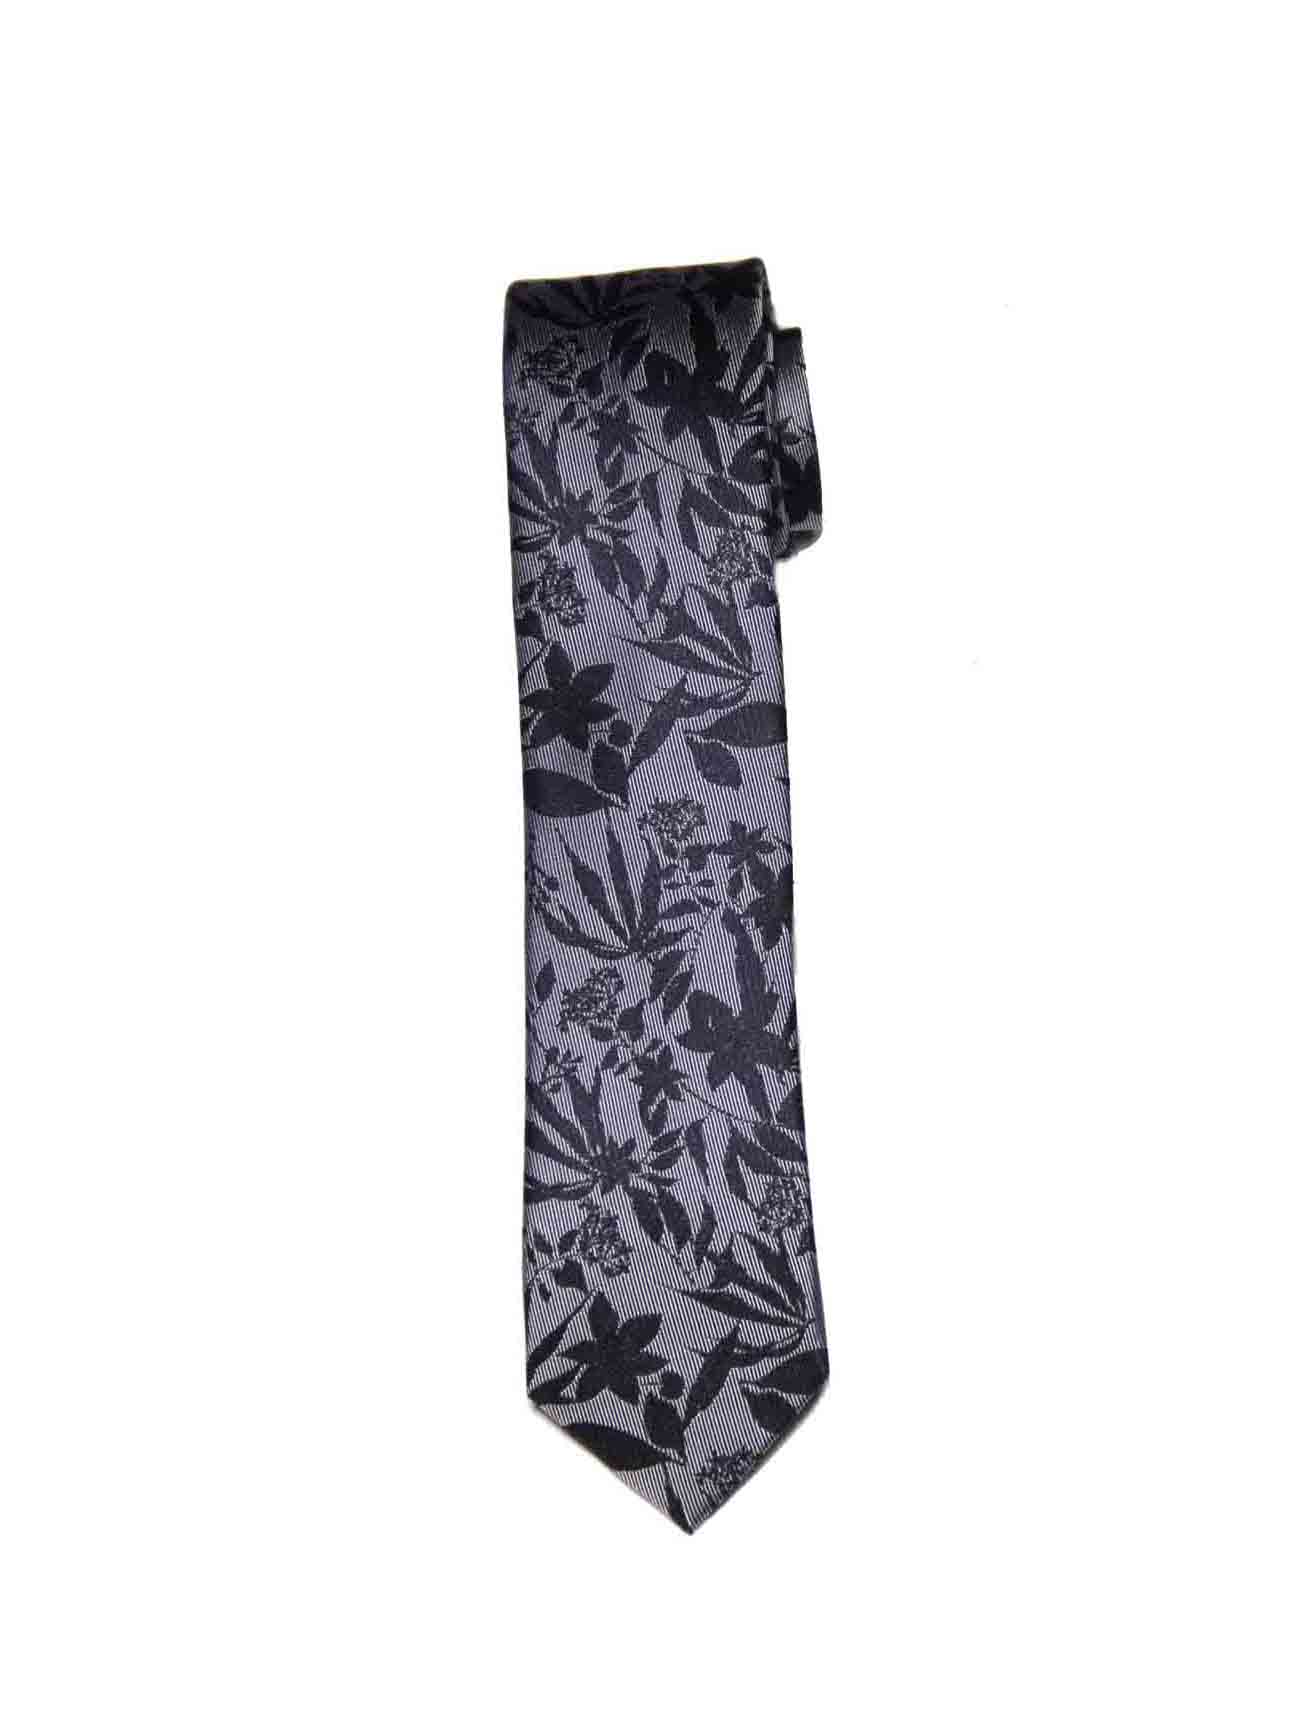 Ted Baker London Mulberry Silk Tie Blue Gray Floral Men's Narrow